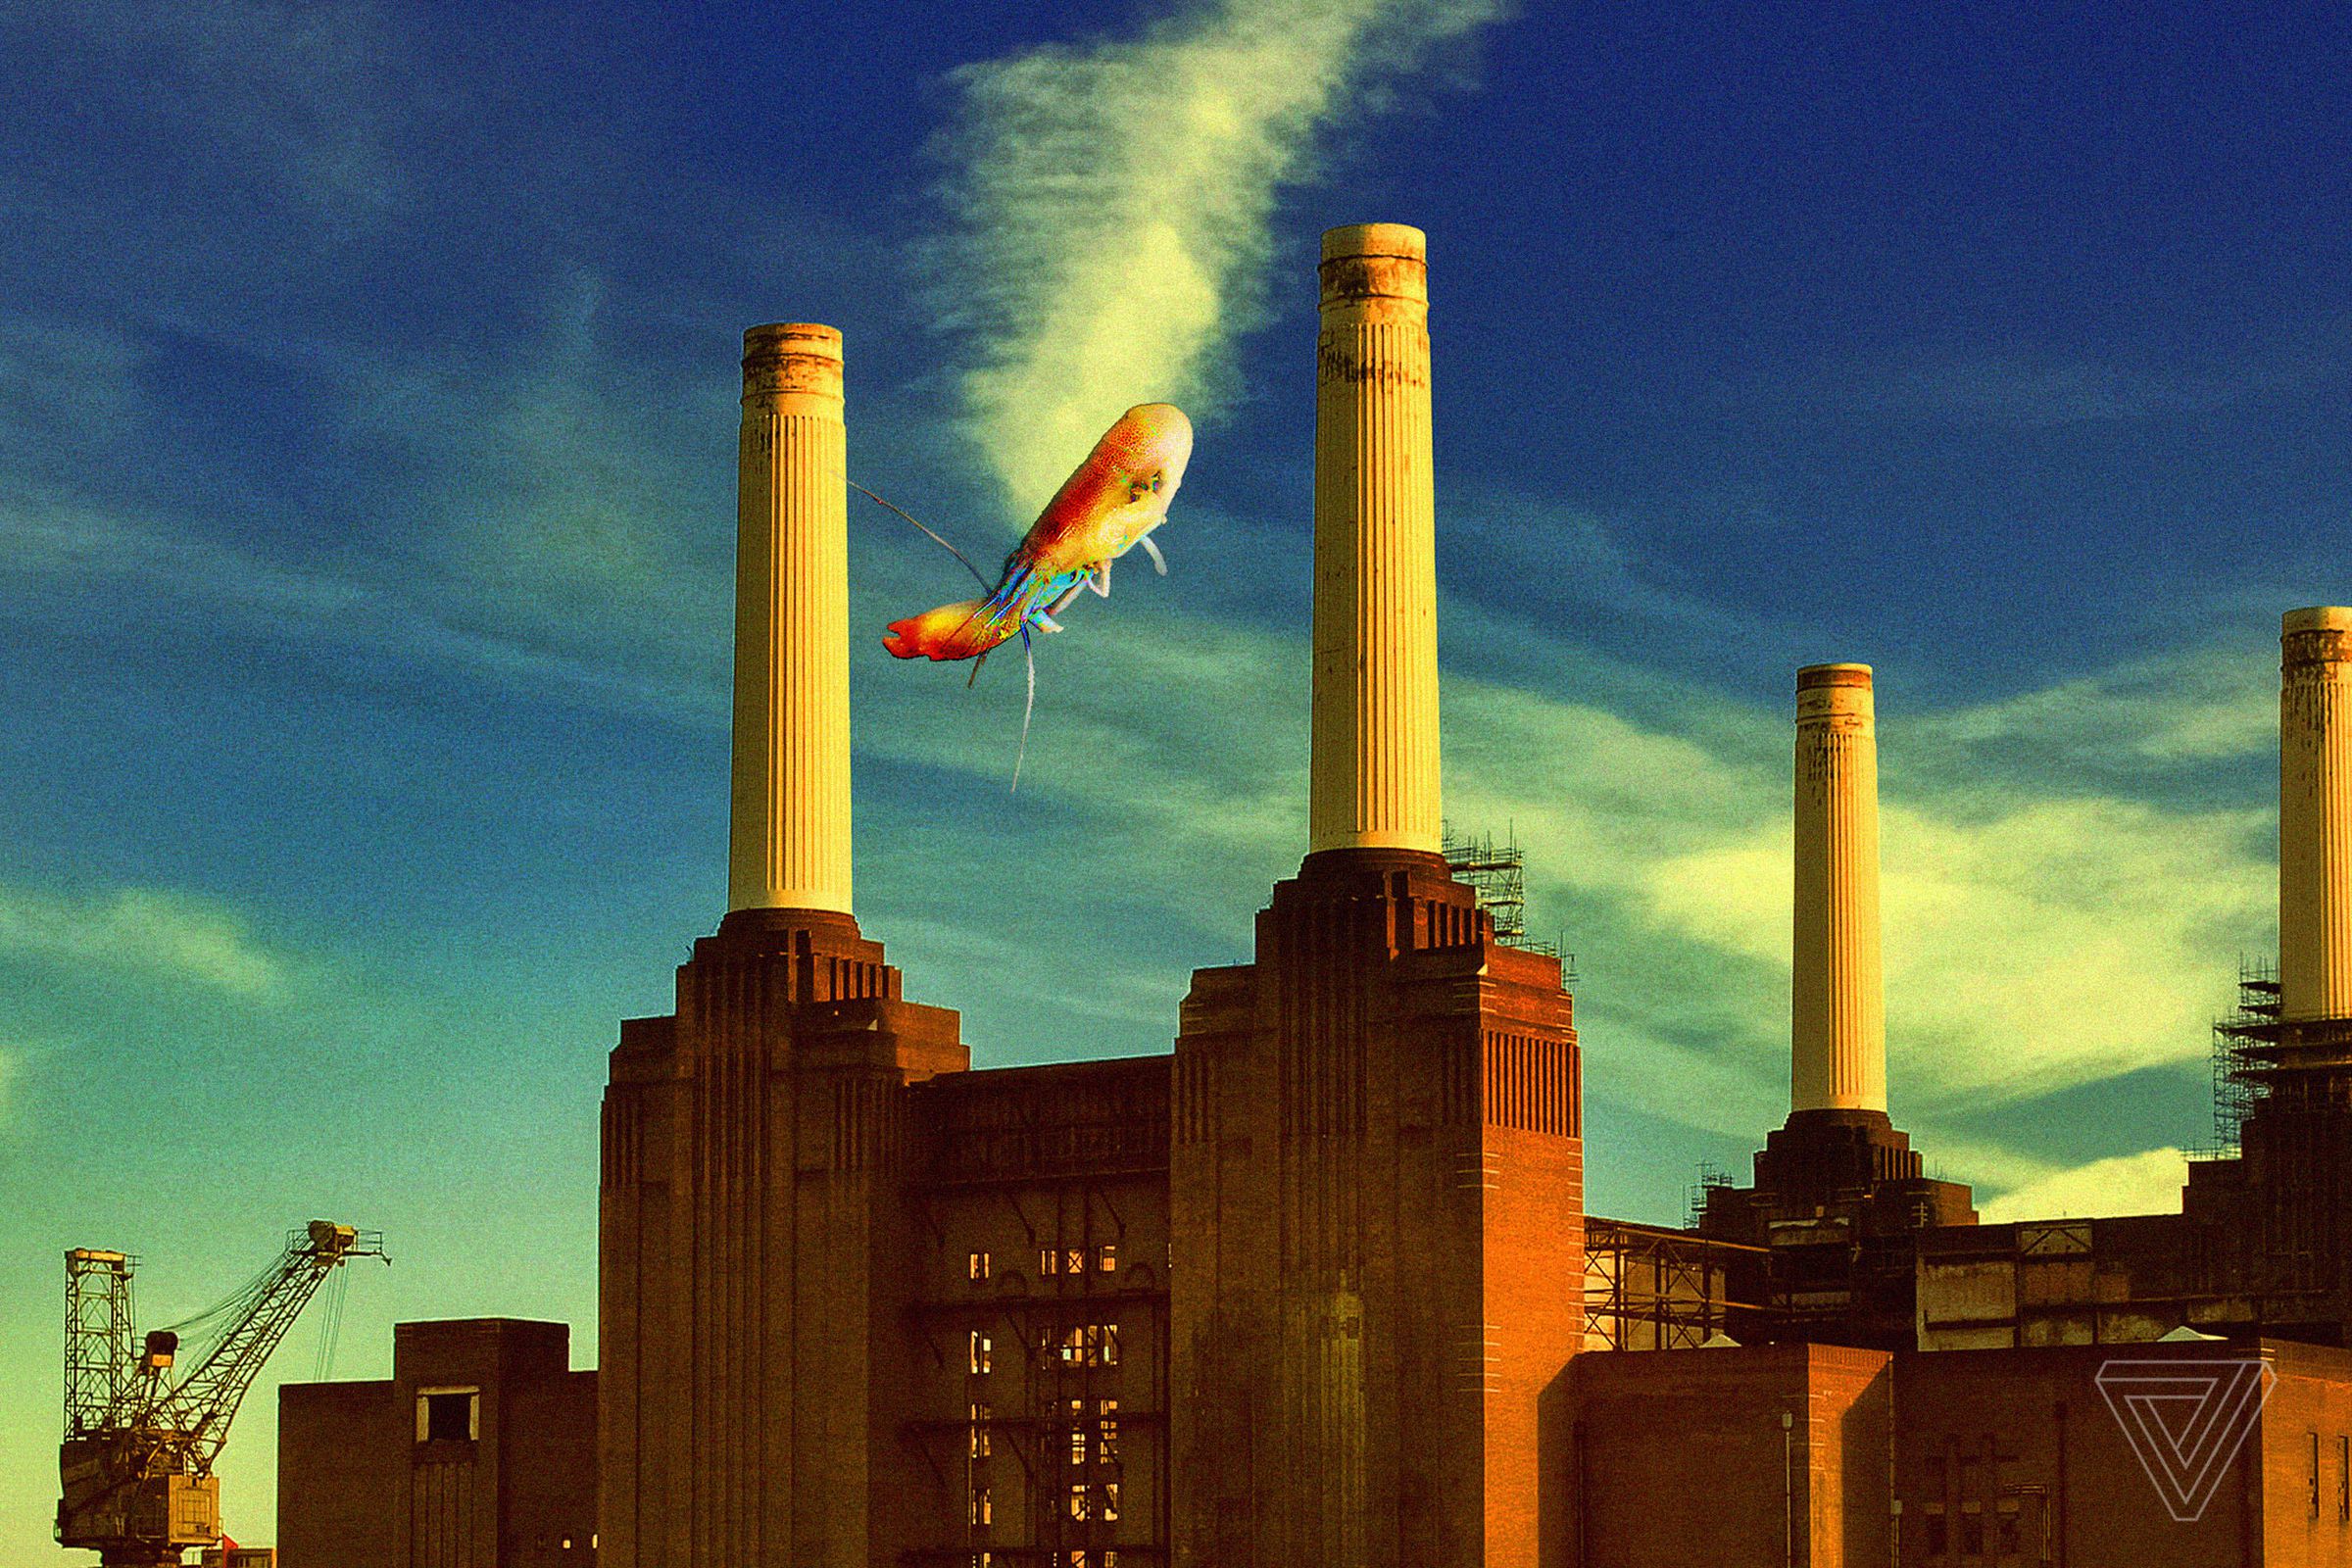 A shrimp of the family Synalpheus floats lazily over Battersea power station in London.